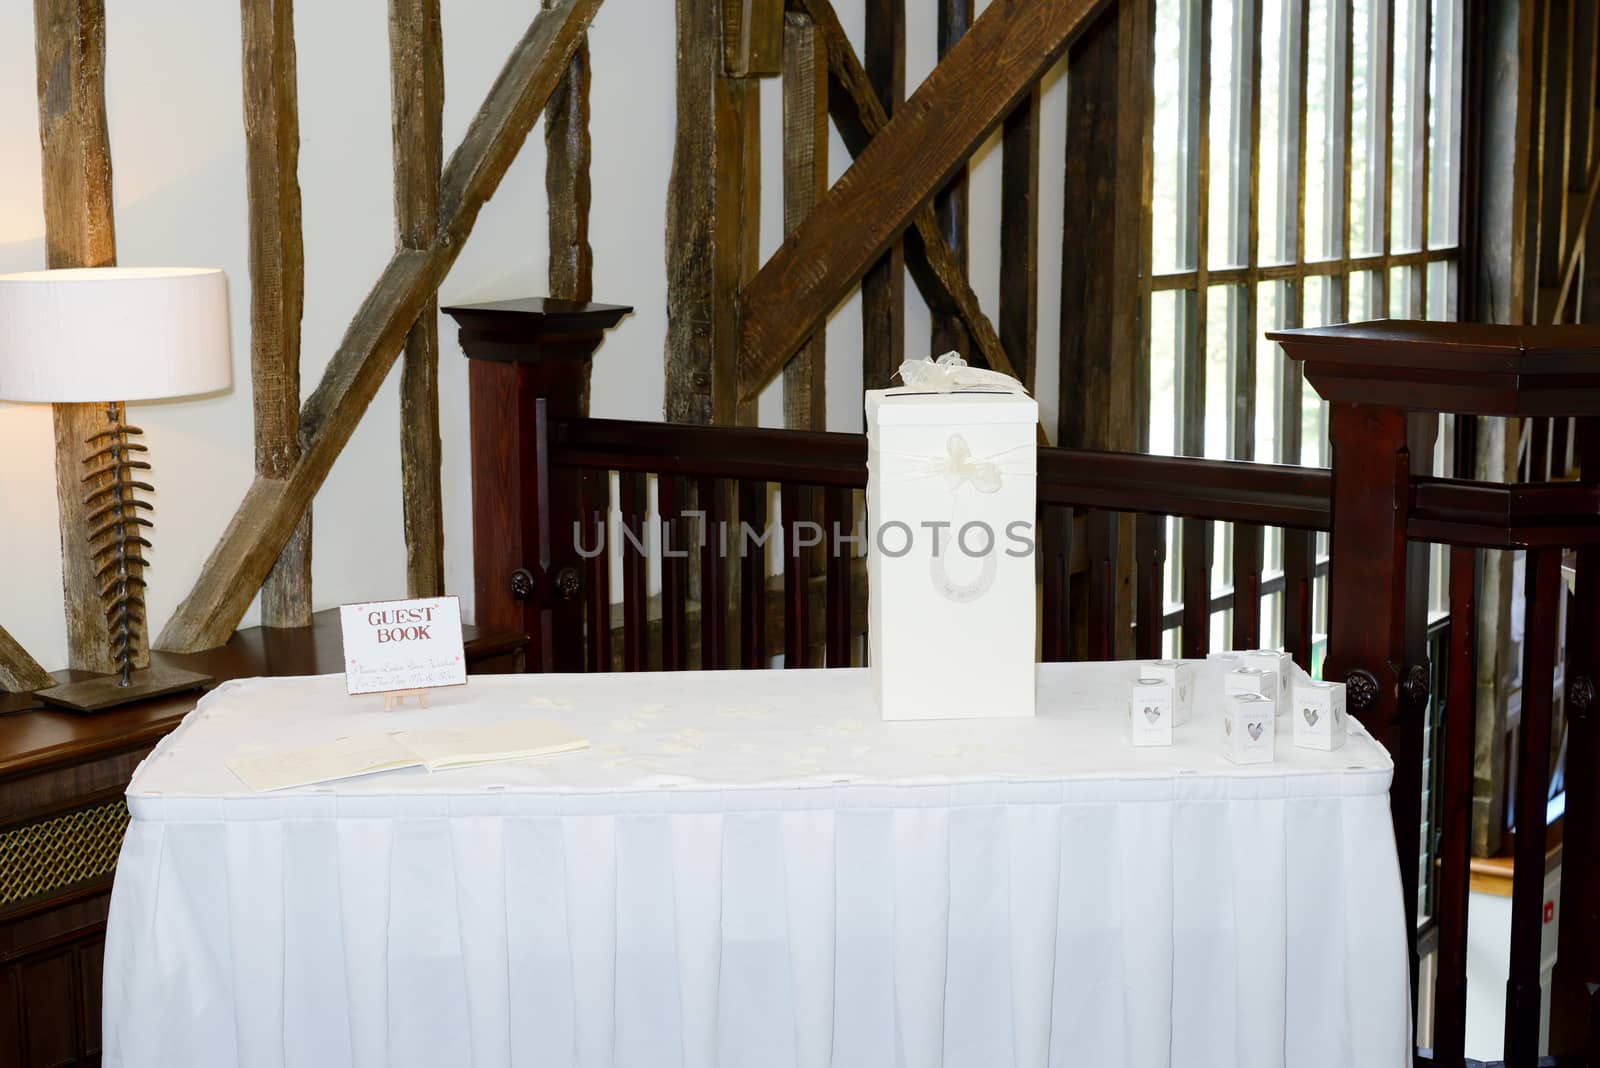 Wedding reception gift table by kmwphotography